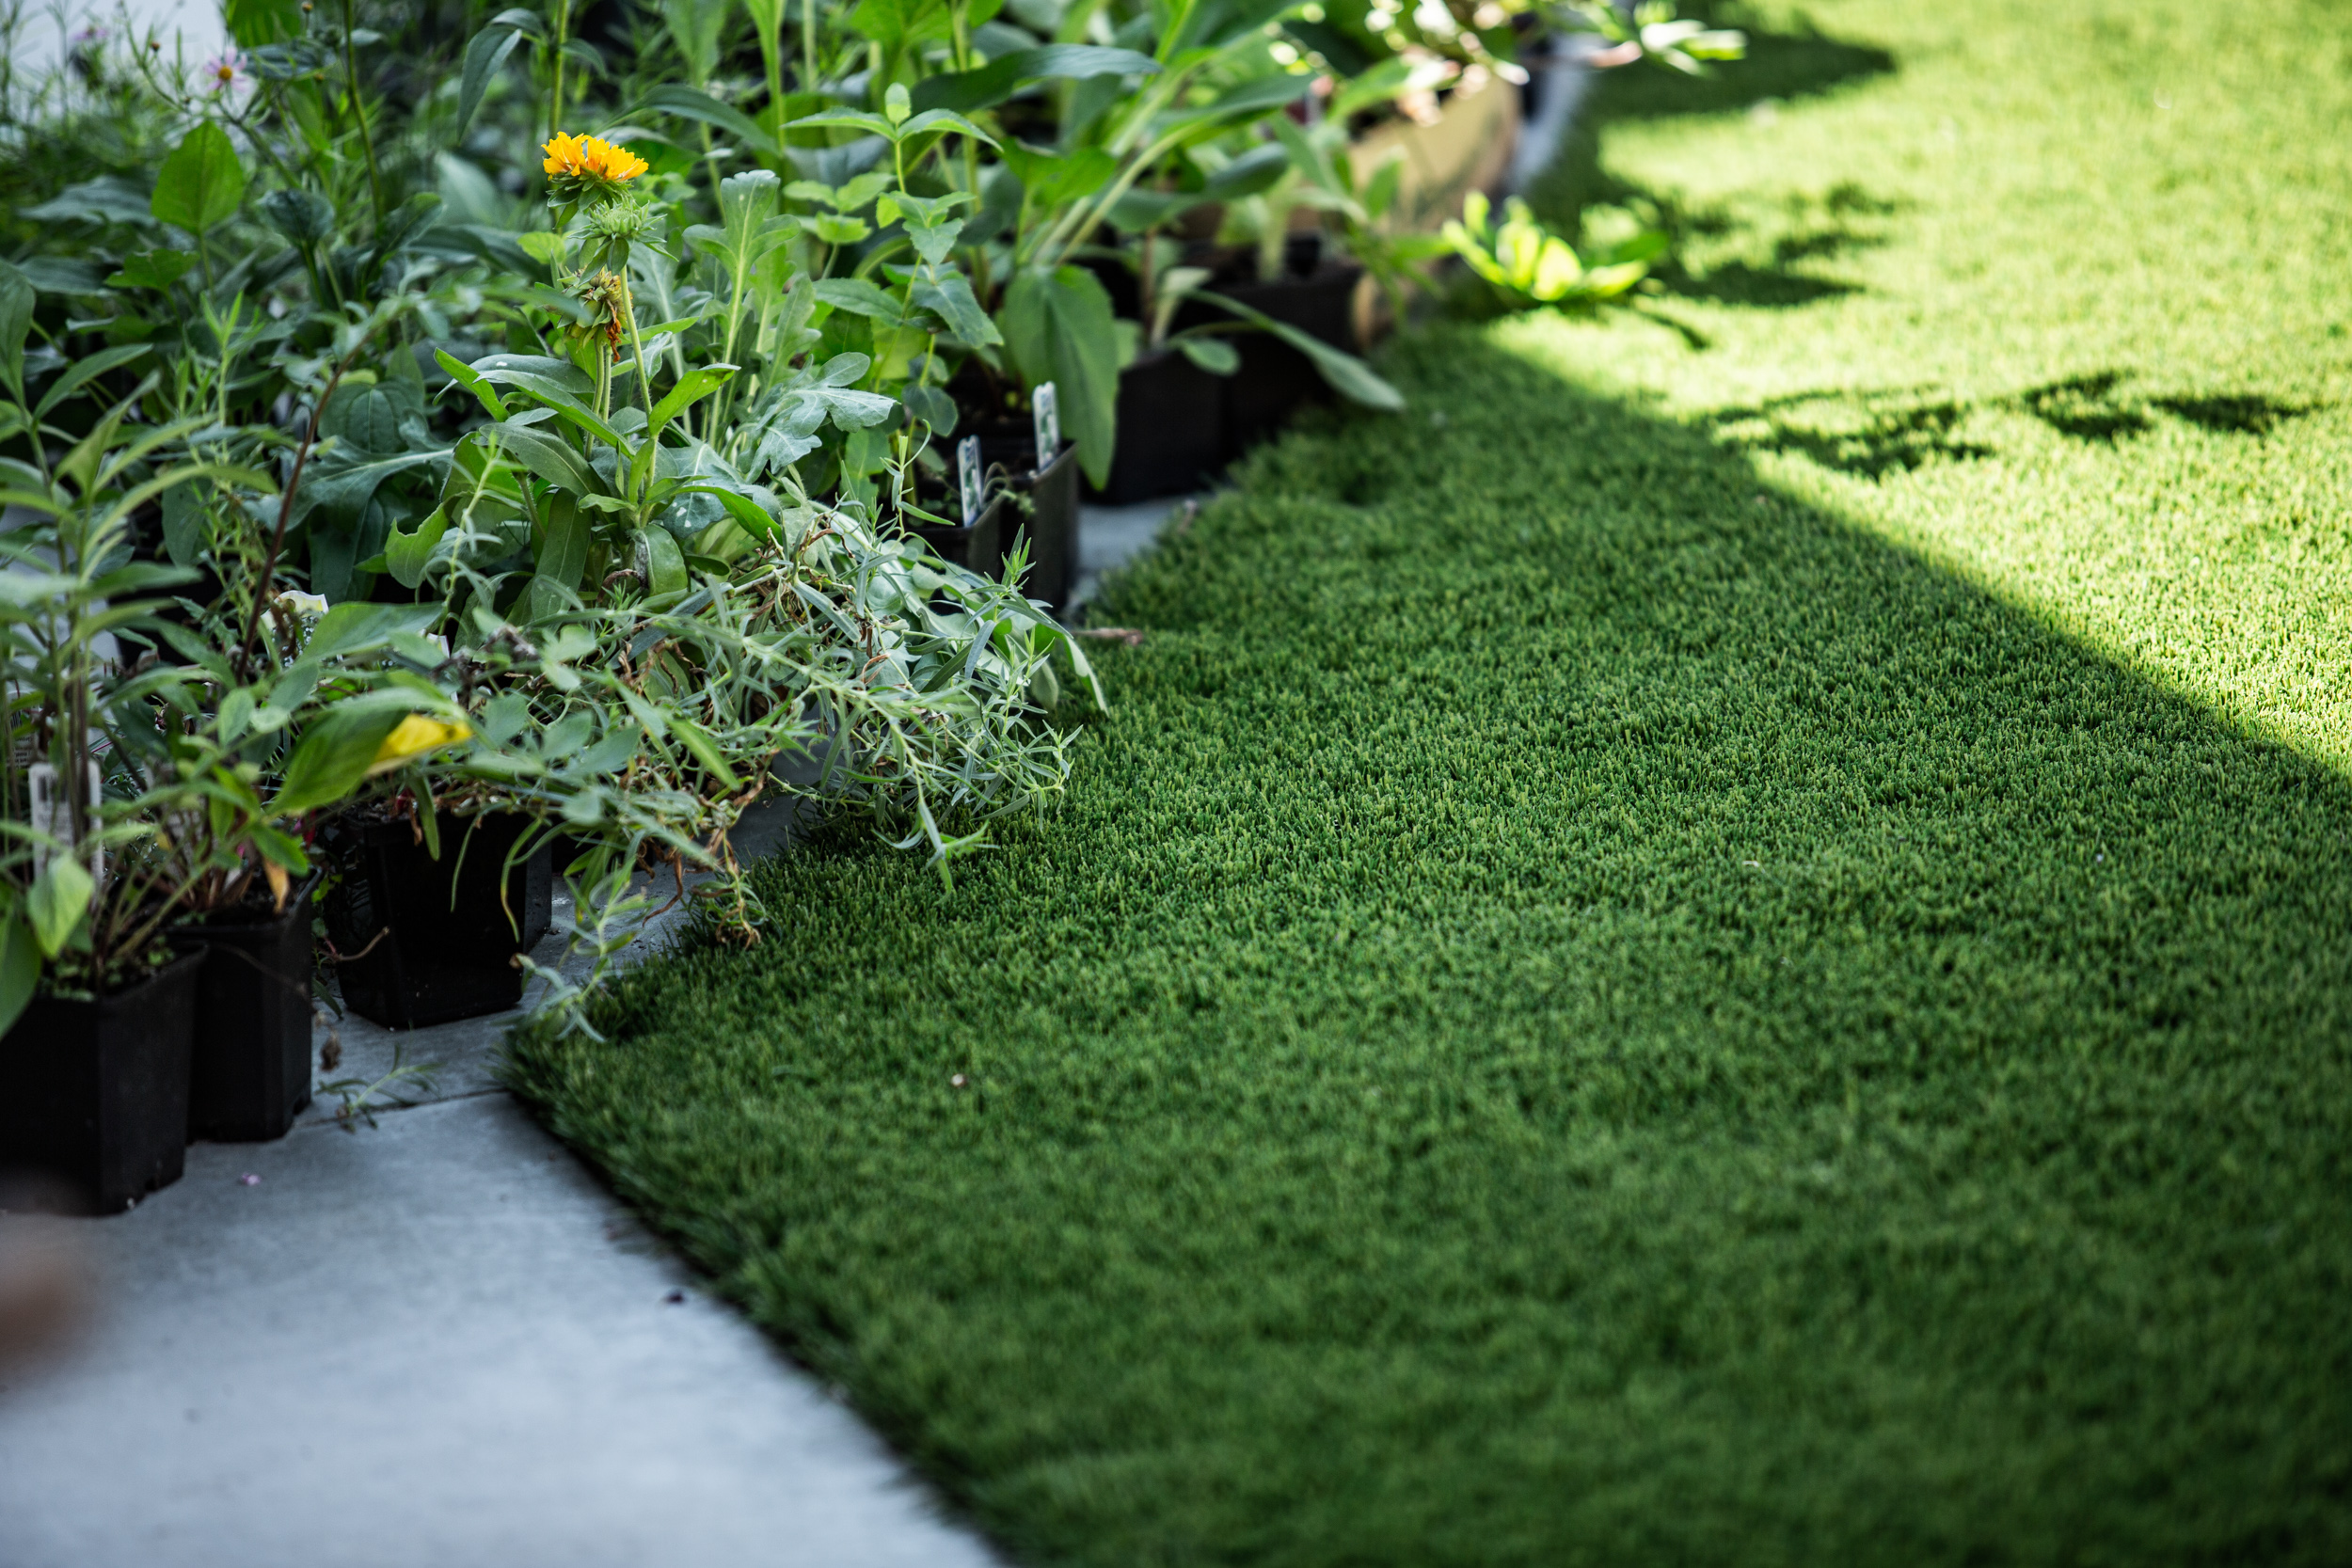 How can artificial turf help conserve water in Vancouver’s dry summers?